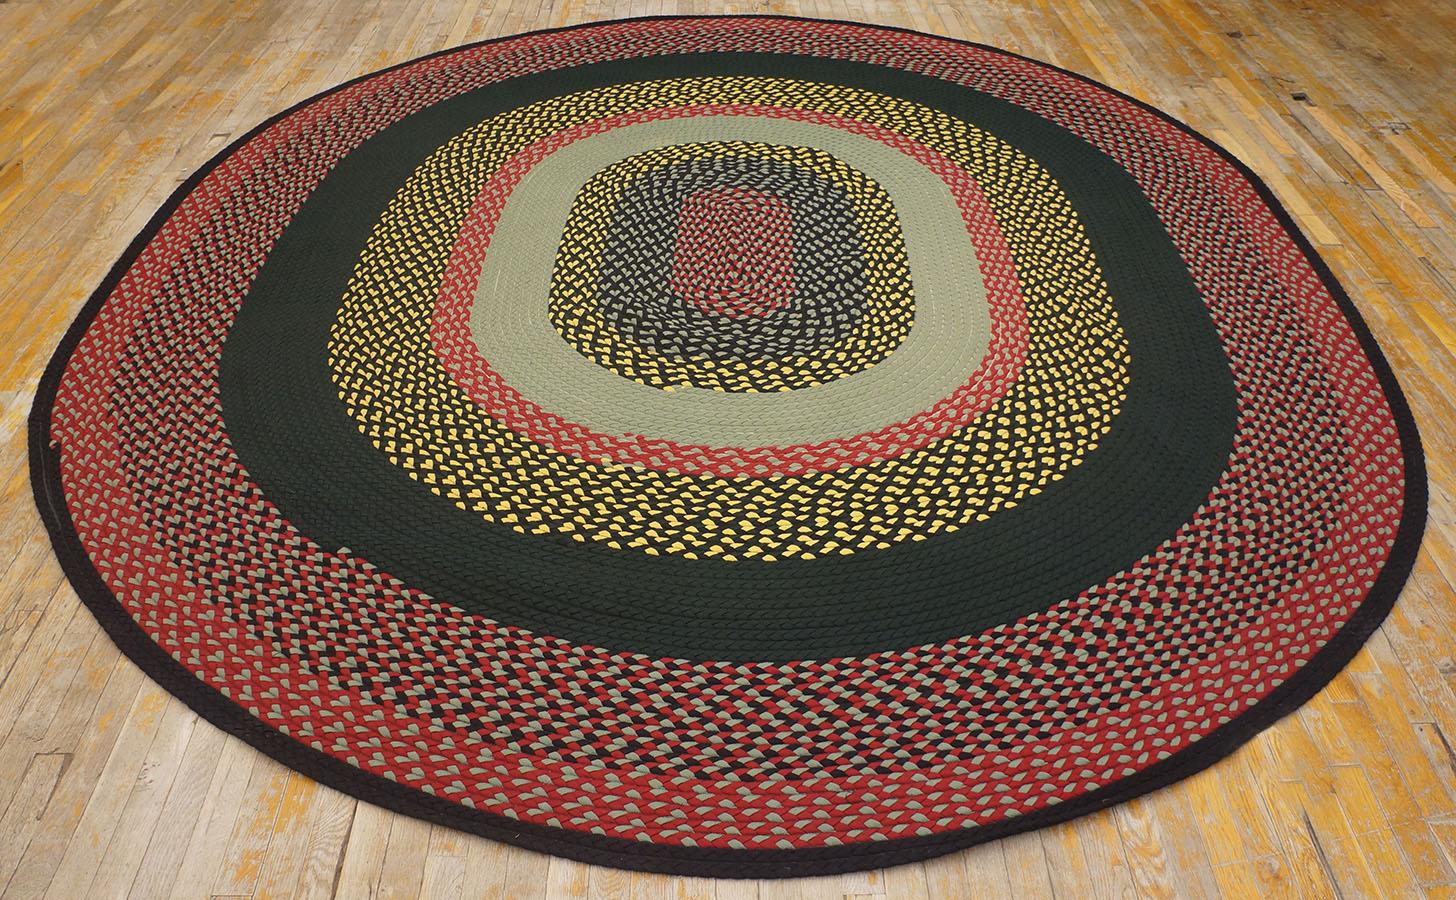 Hand-Woven 1980s American Braided Rug ( 10' x 11'4